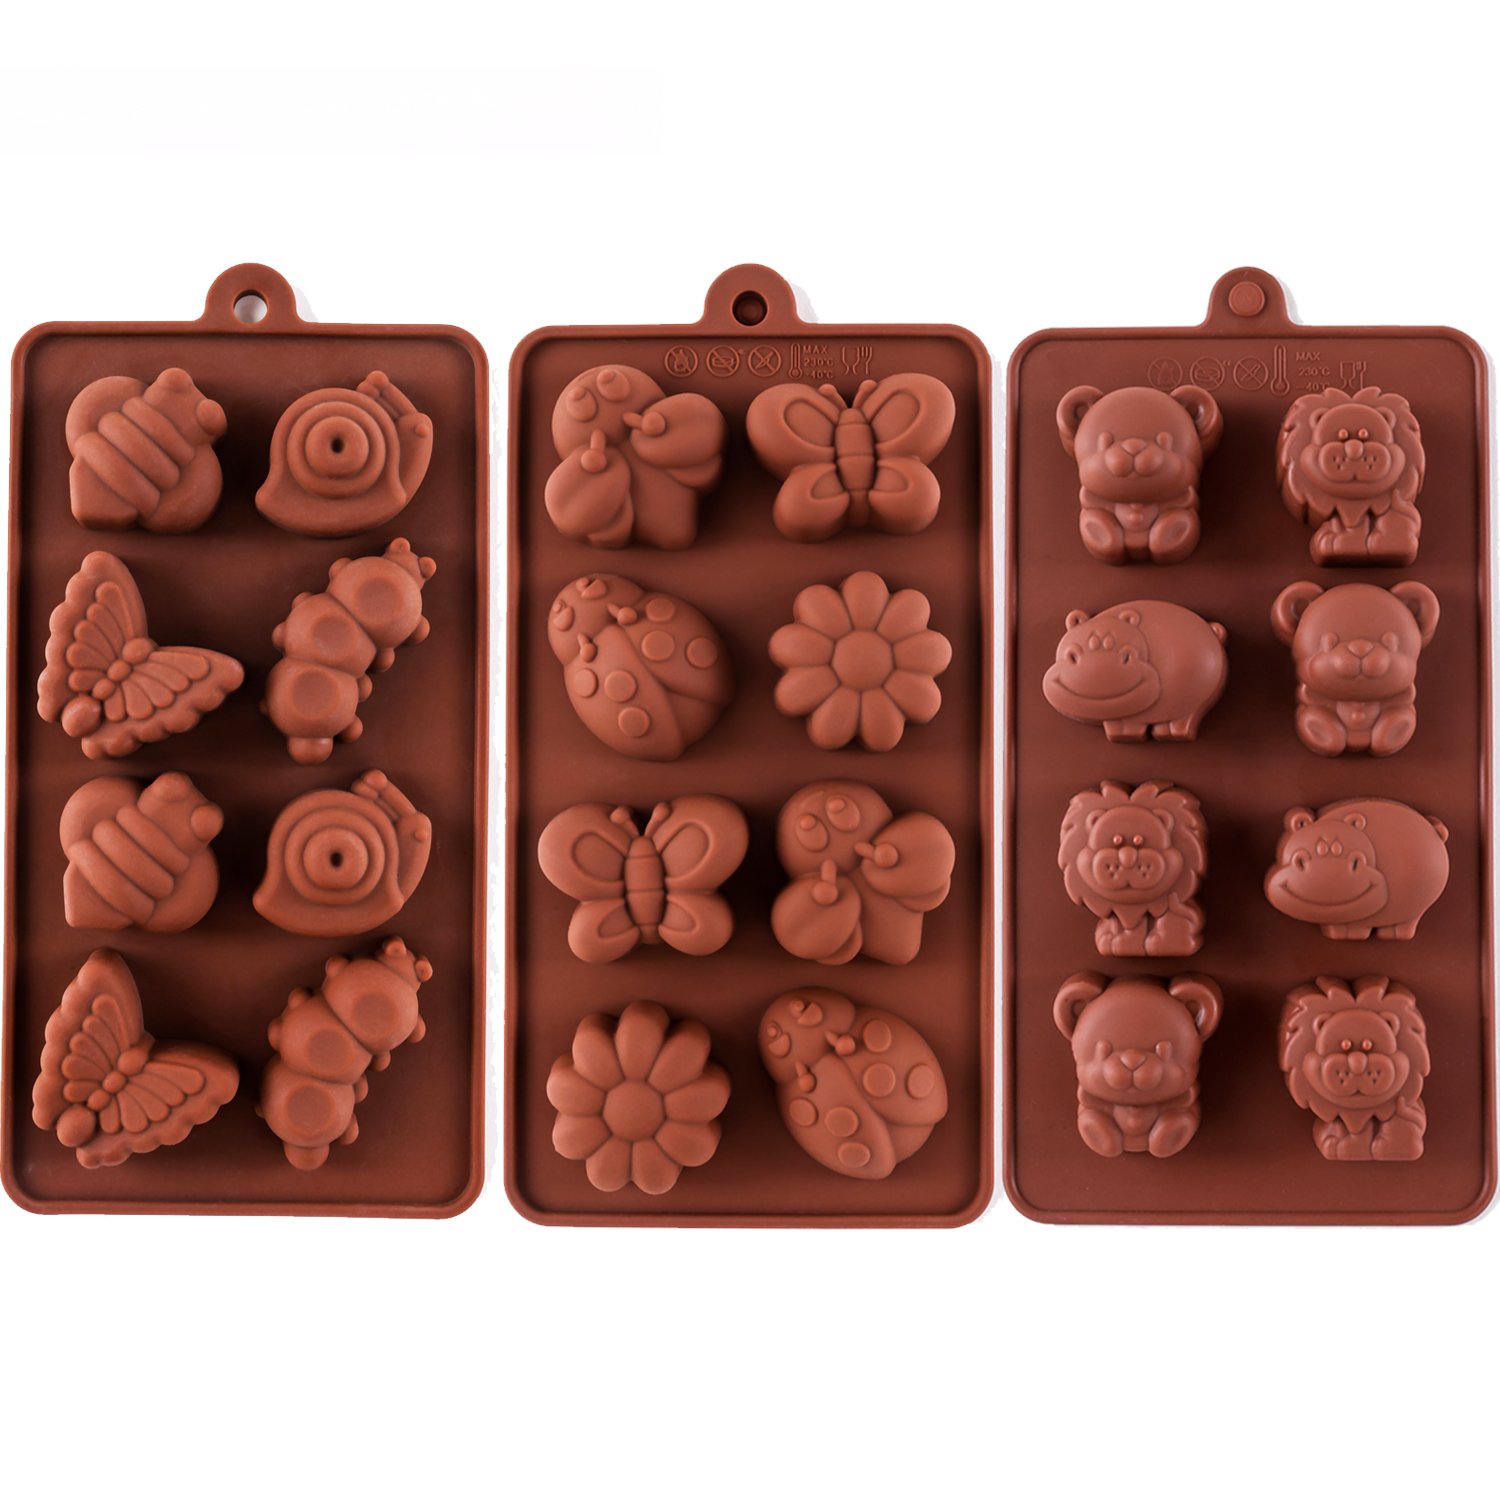 Mini Star Silicone Mold for Chocolates, Candies & Desserts | Star Mold